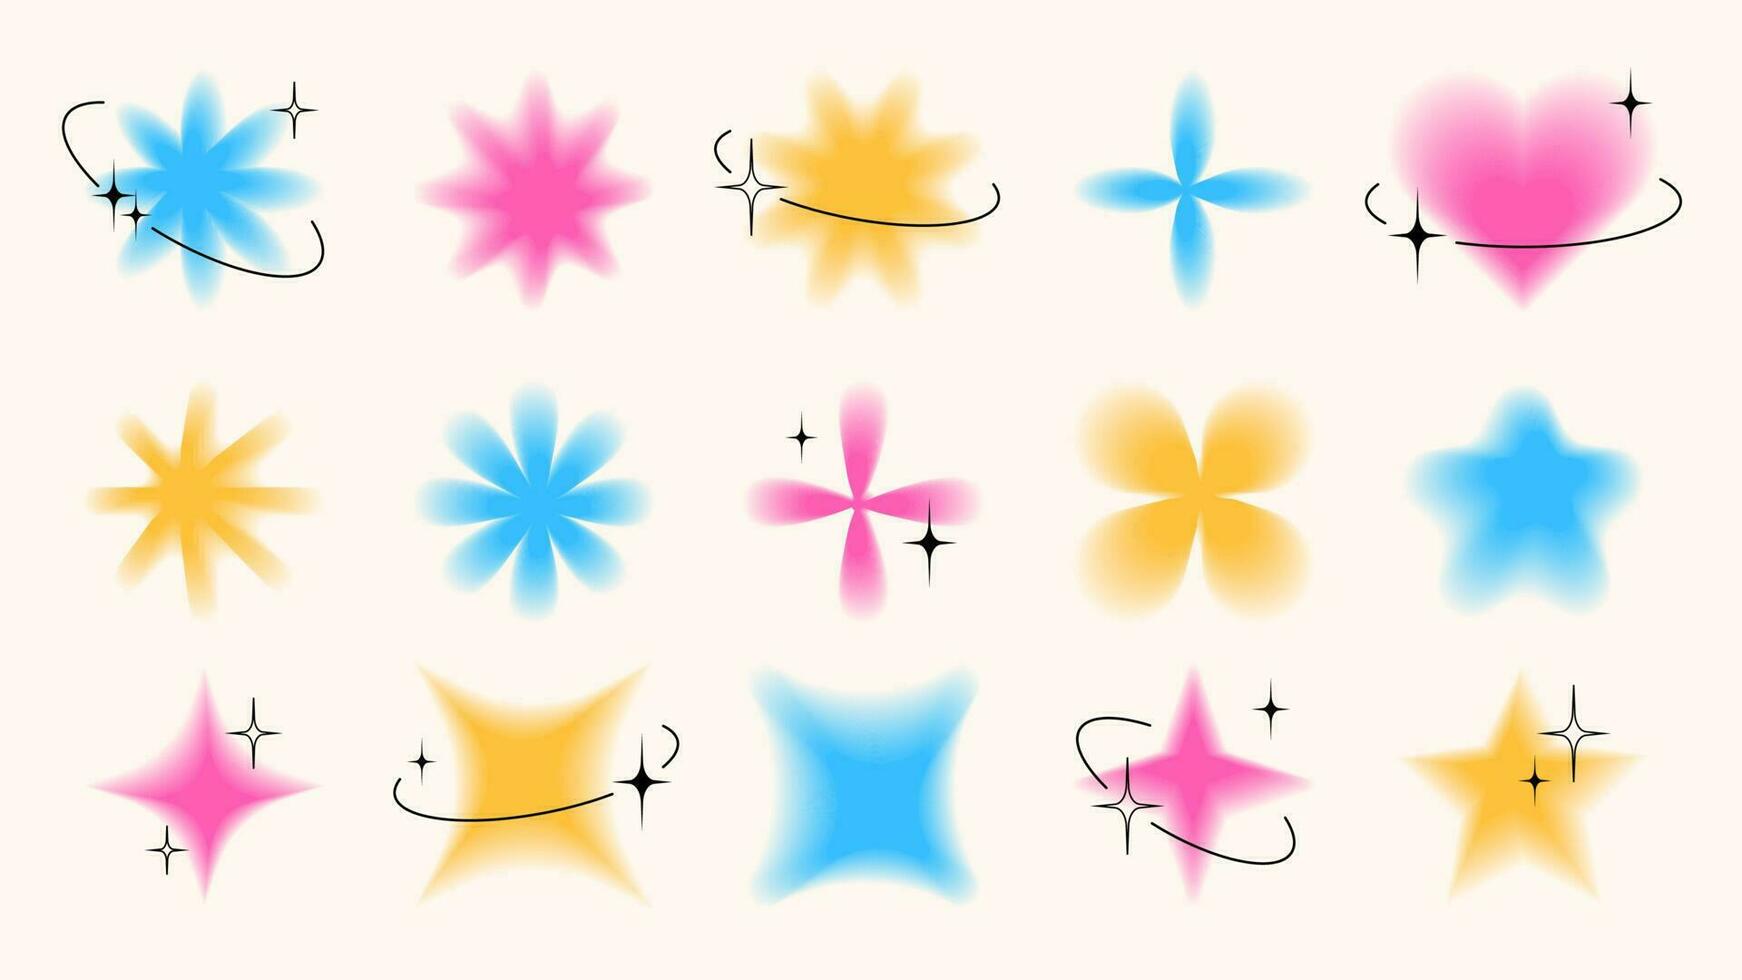 Trendy Y2K blurred objects, flowers, stars, heart and sparks. Group of retro graphic design elements with decorative stars and black frames. vector